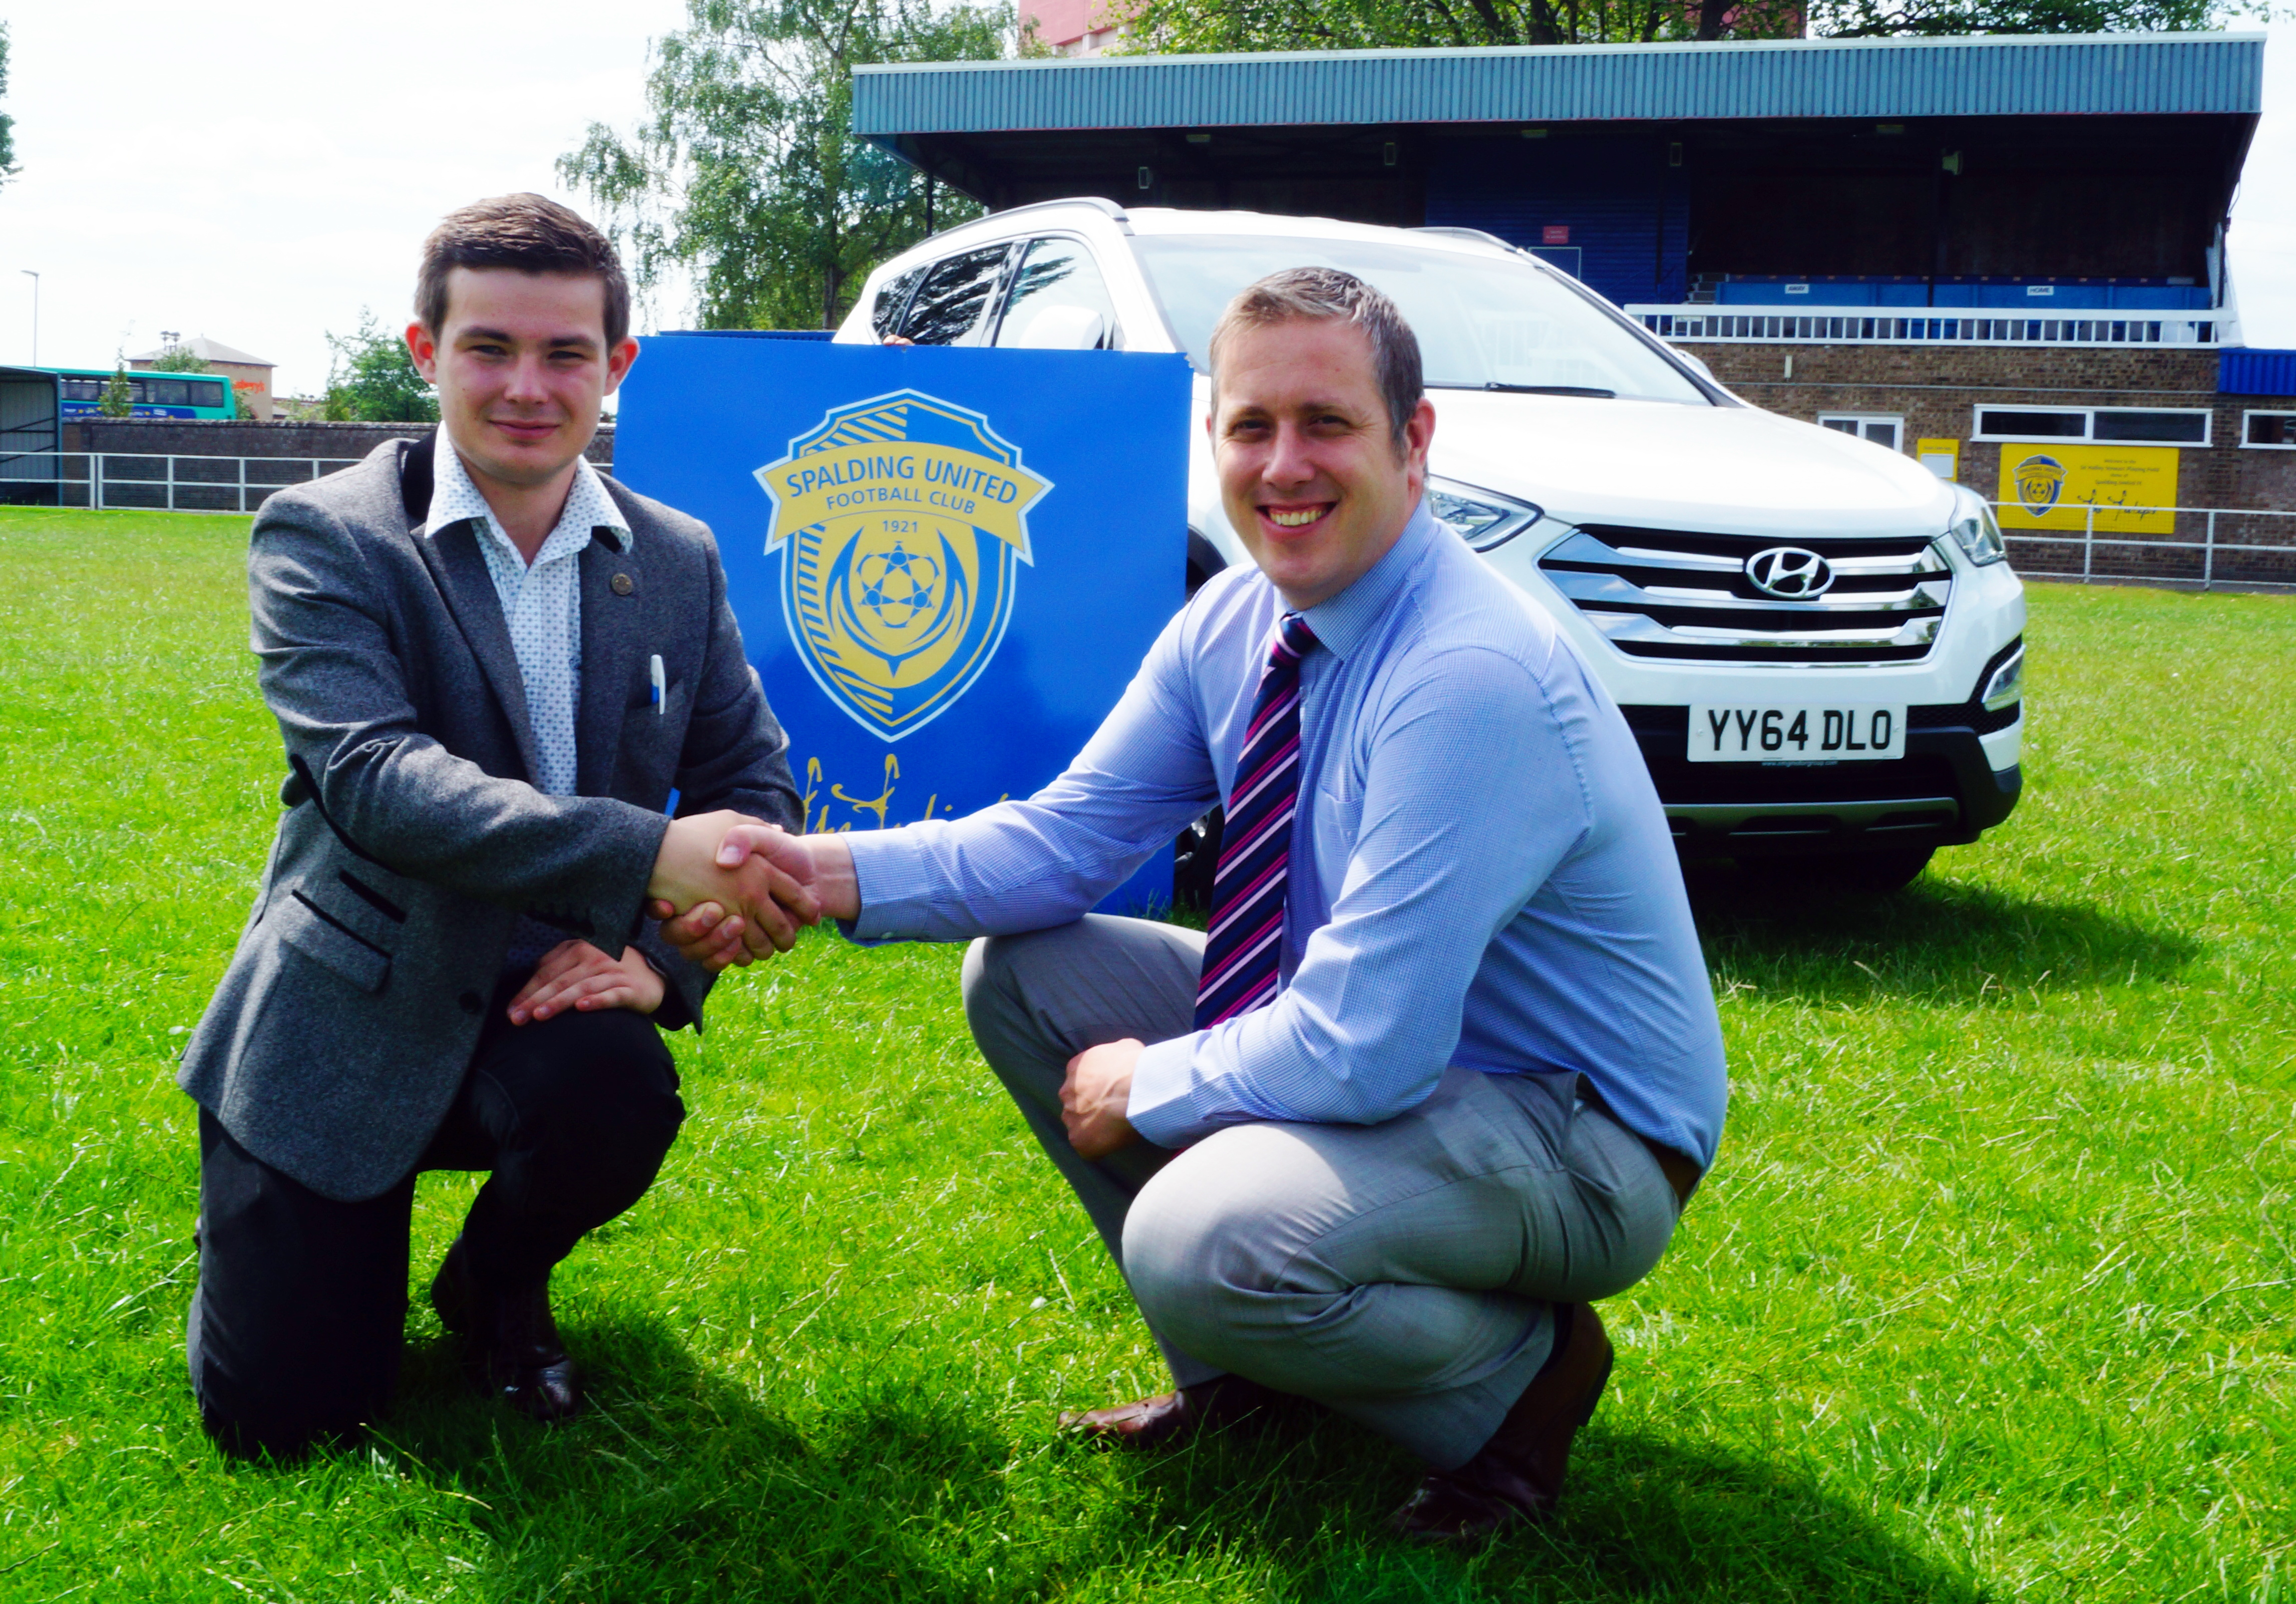 DONE DEAL: Spalding United shook on a three-year sponsorship deal. Photo by MARK GOODALE